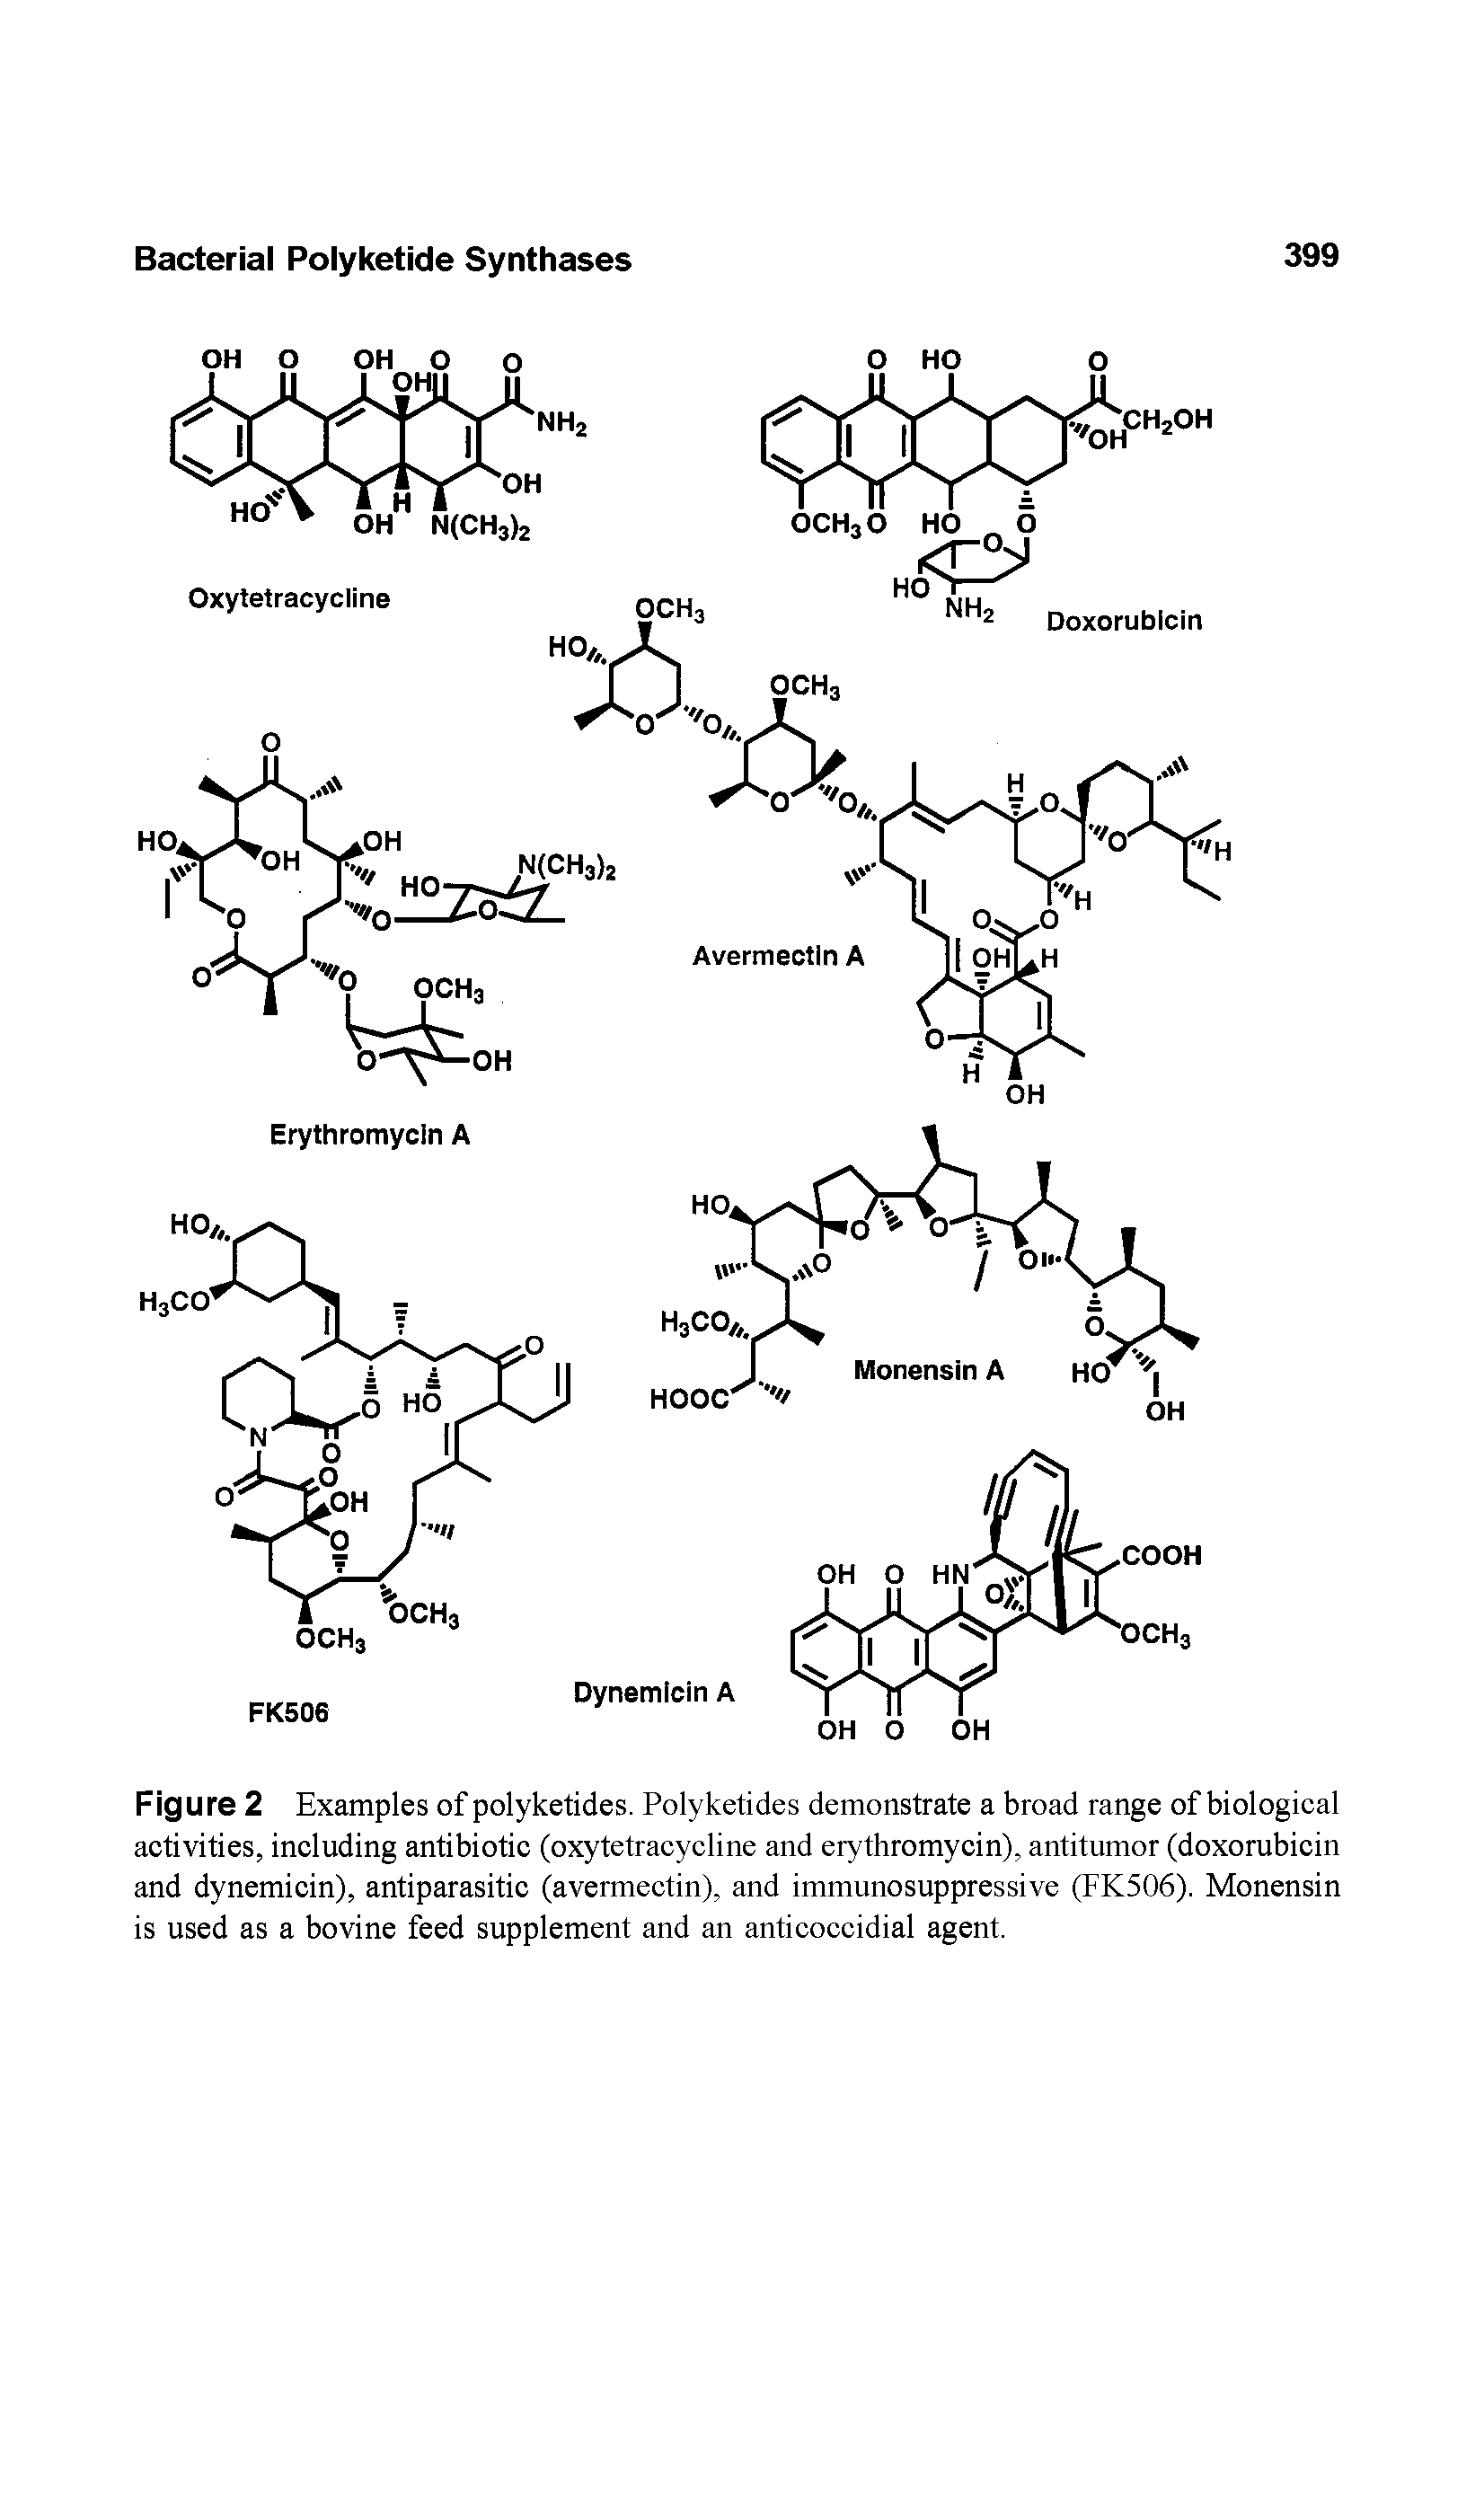 Figure 2 Examples of polyketides. Polyketides demonstrate a broad range of biological activities, including antibiotic (oxytetracycline and erythromycin), antitumor (doxorubicin and dynemicin), antiparasitic (avermectin), and immunosuppressive (FK506). Monensin is used as a bovine feed supplement and an anticoccidial agent.